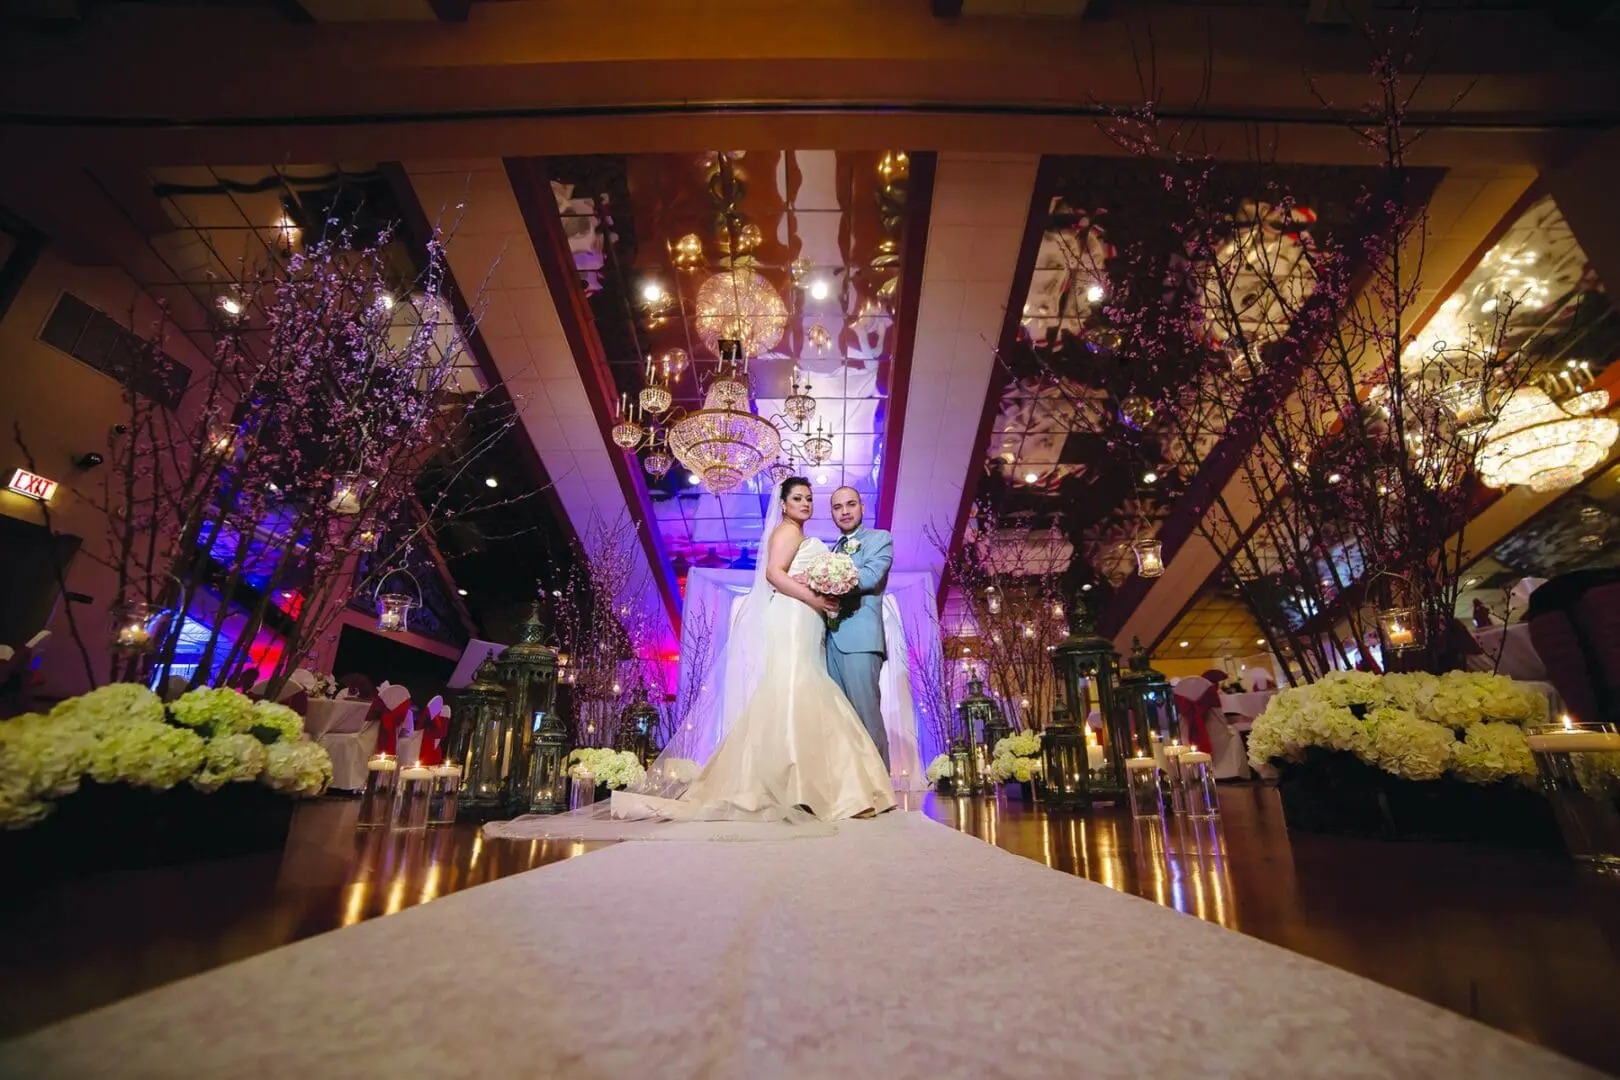 A bride and groom pose for the camera in front of a stage.